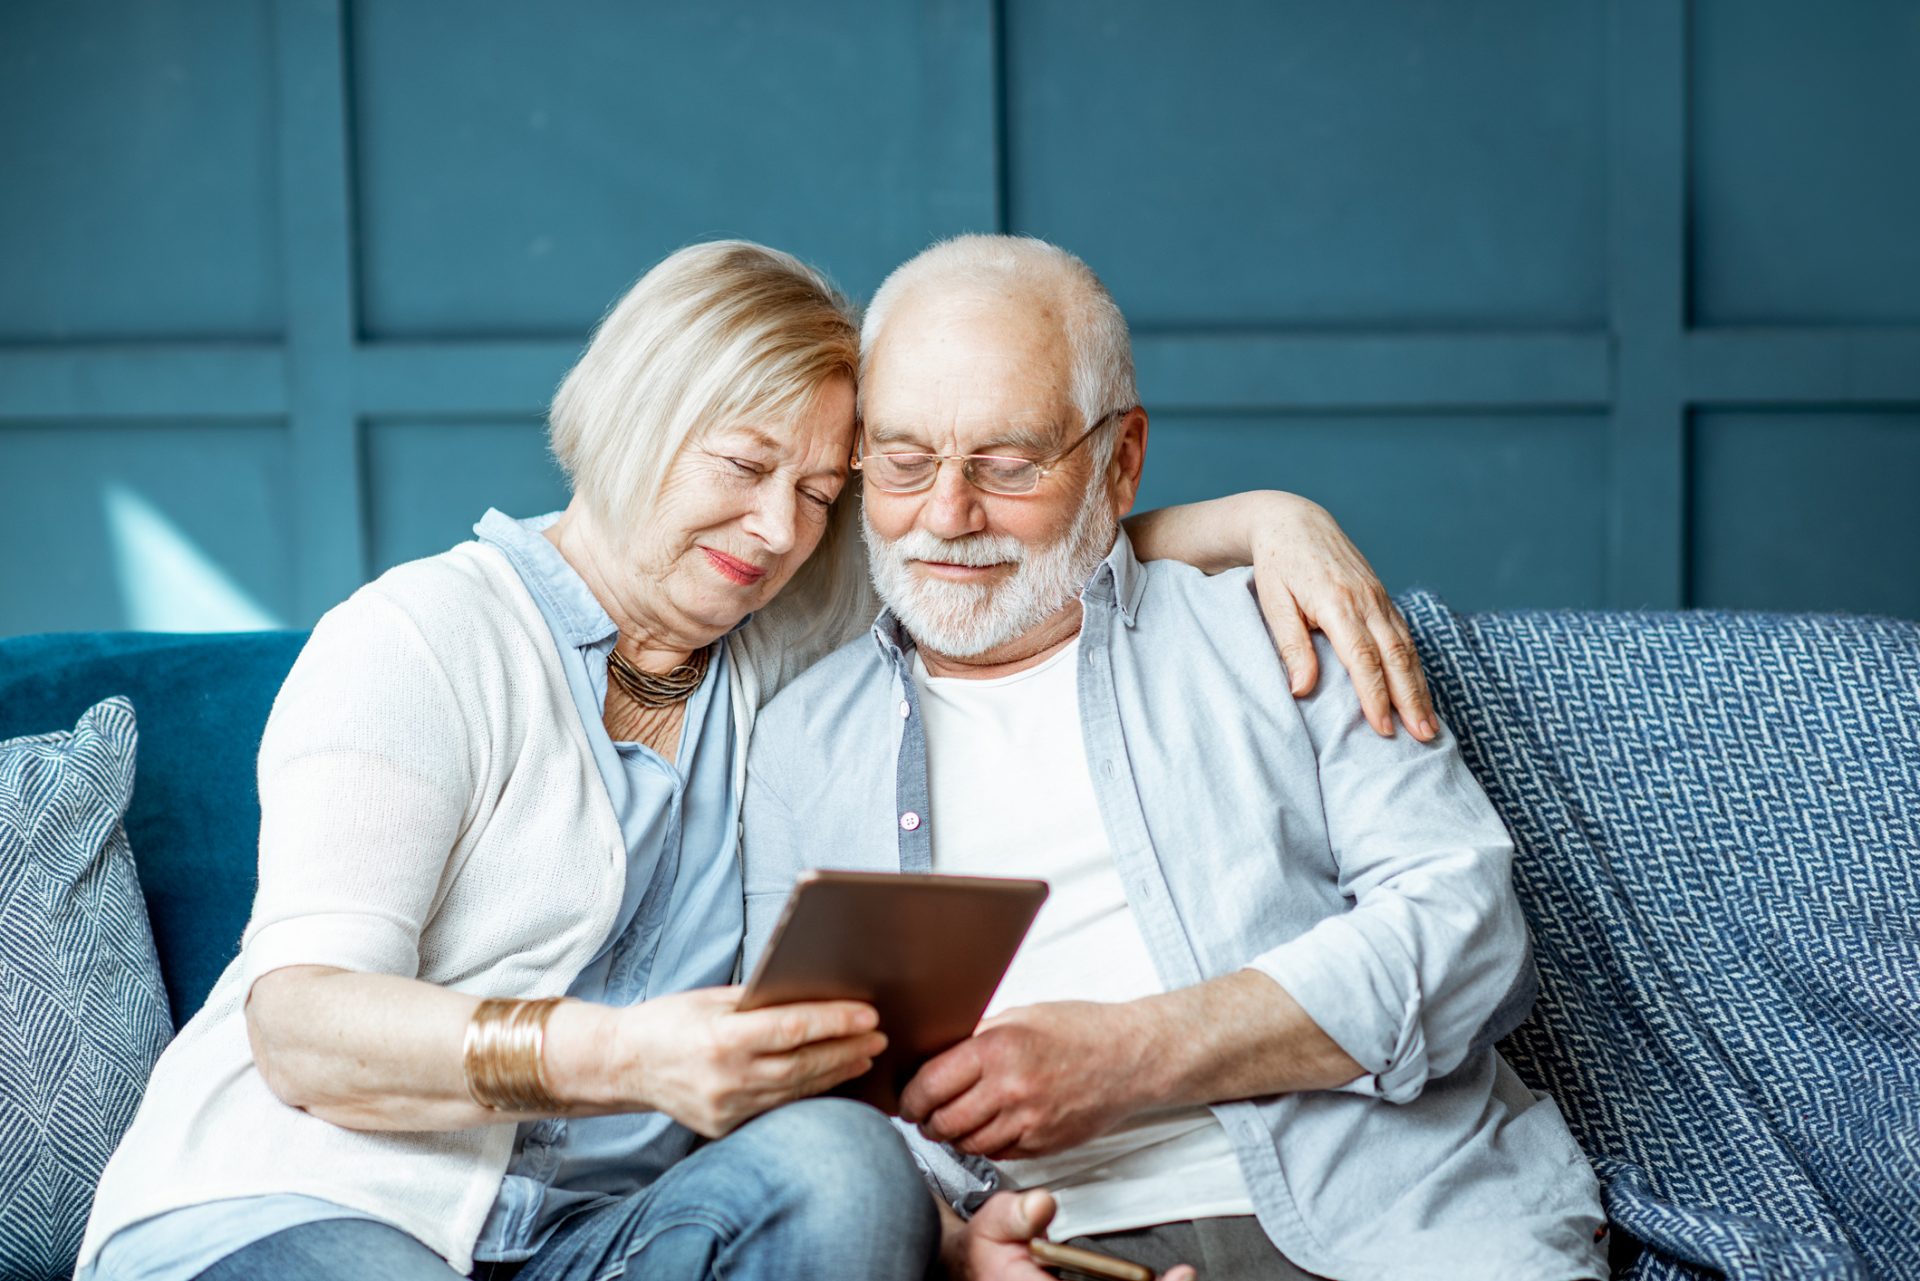 Senior couple sitting close on a couch, looking at a tablet screen with gentle smiles.